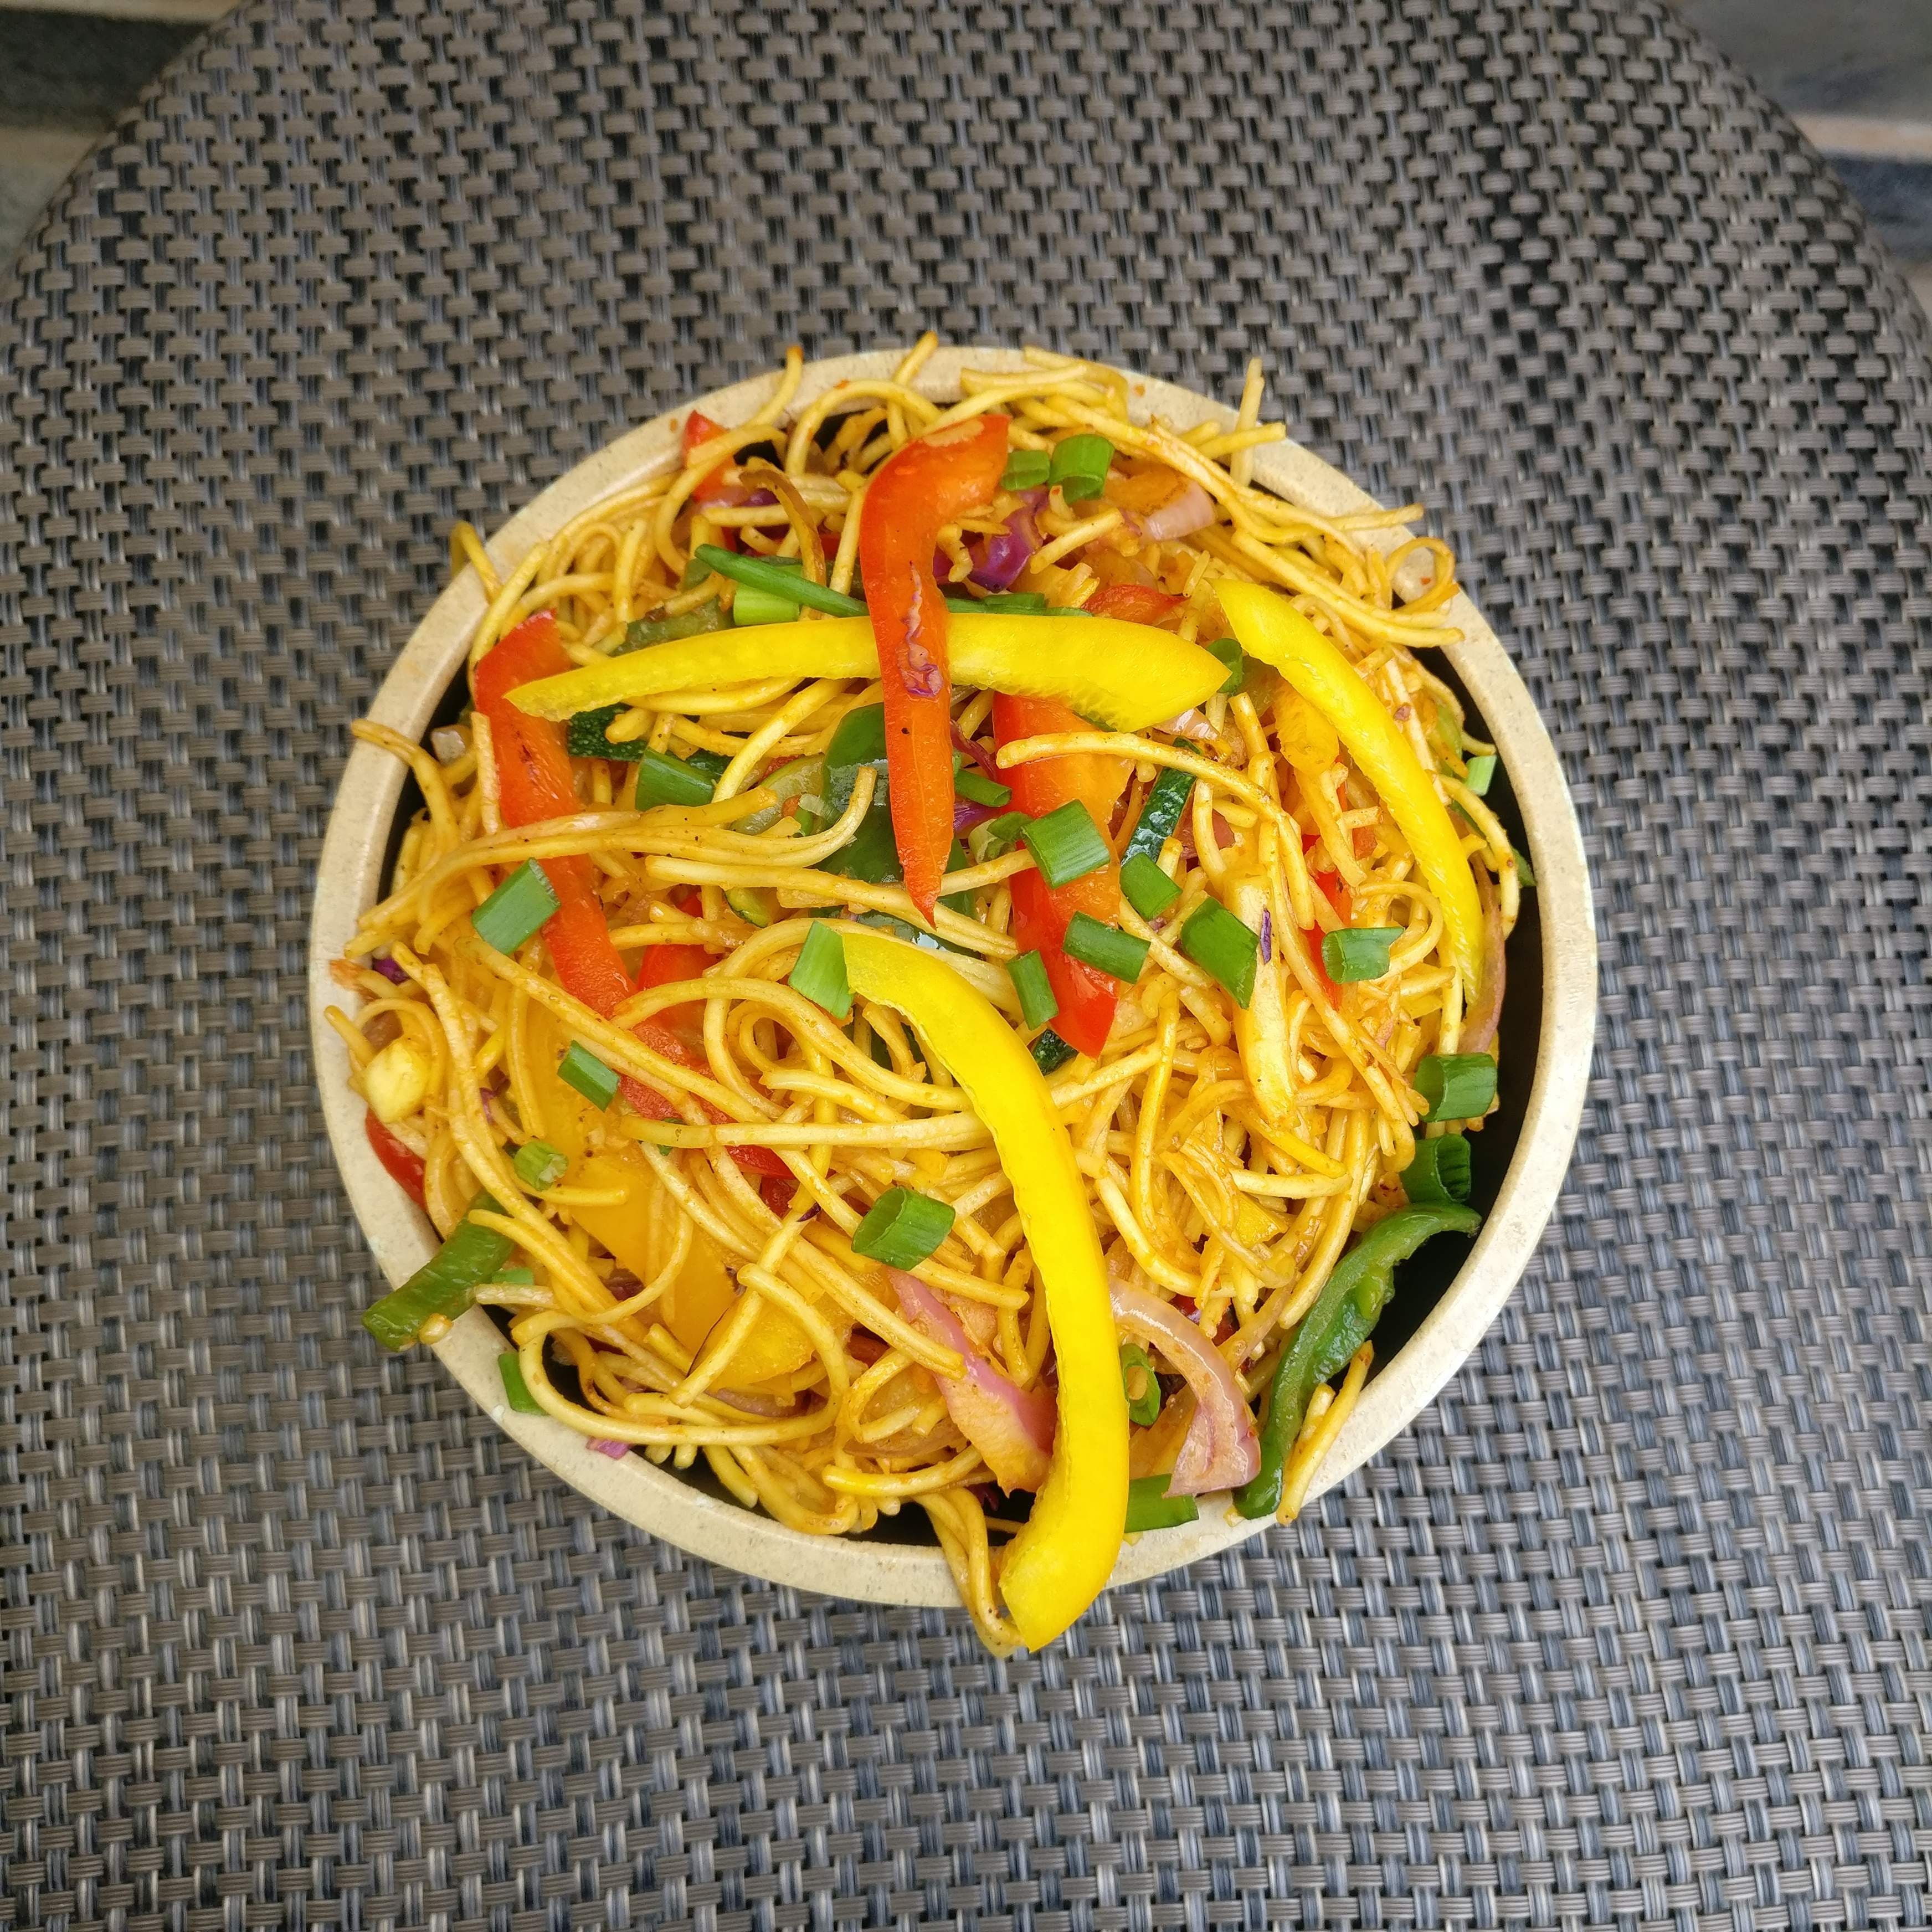 Dish,Cuisine,Food,Noodle,Chinese noodles,Ingredient,Chow mein,Naporitan,Yakisoba,Lo mein